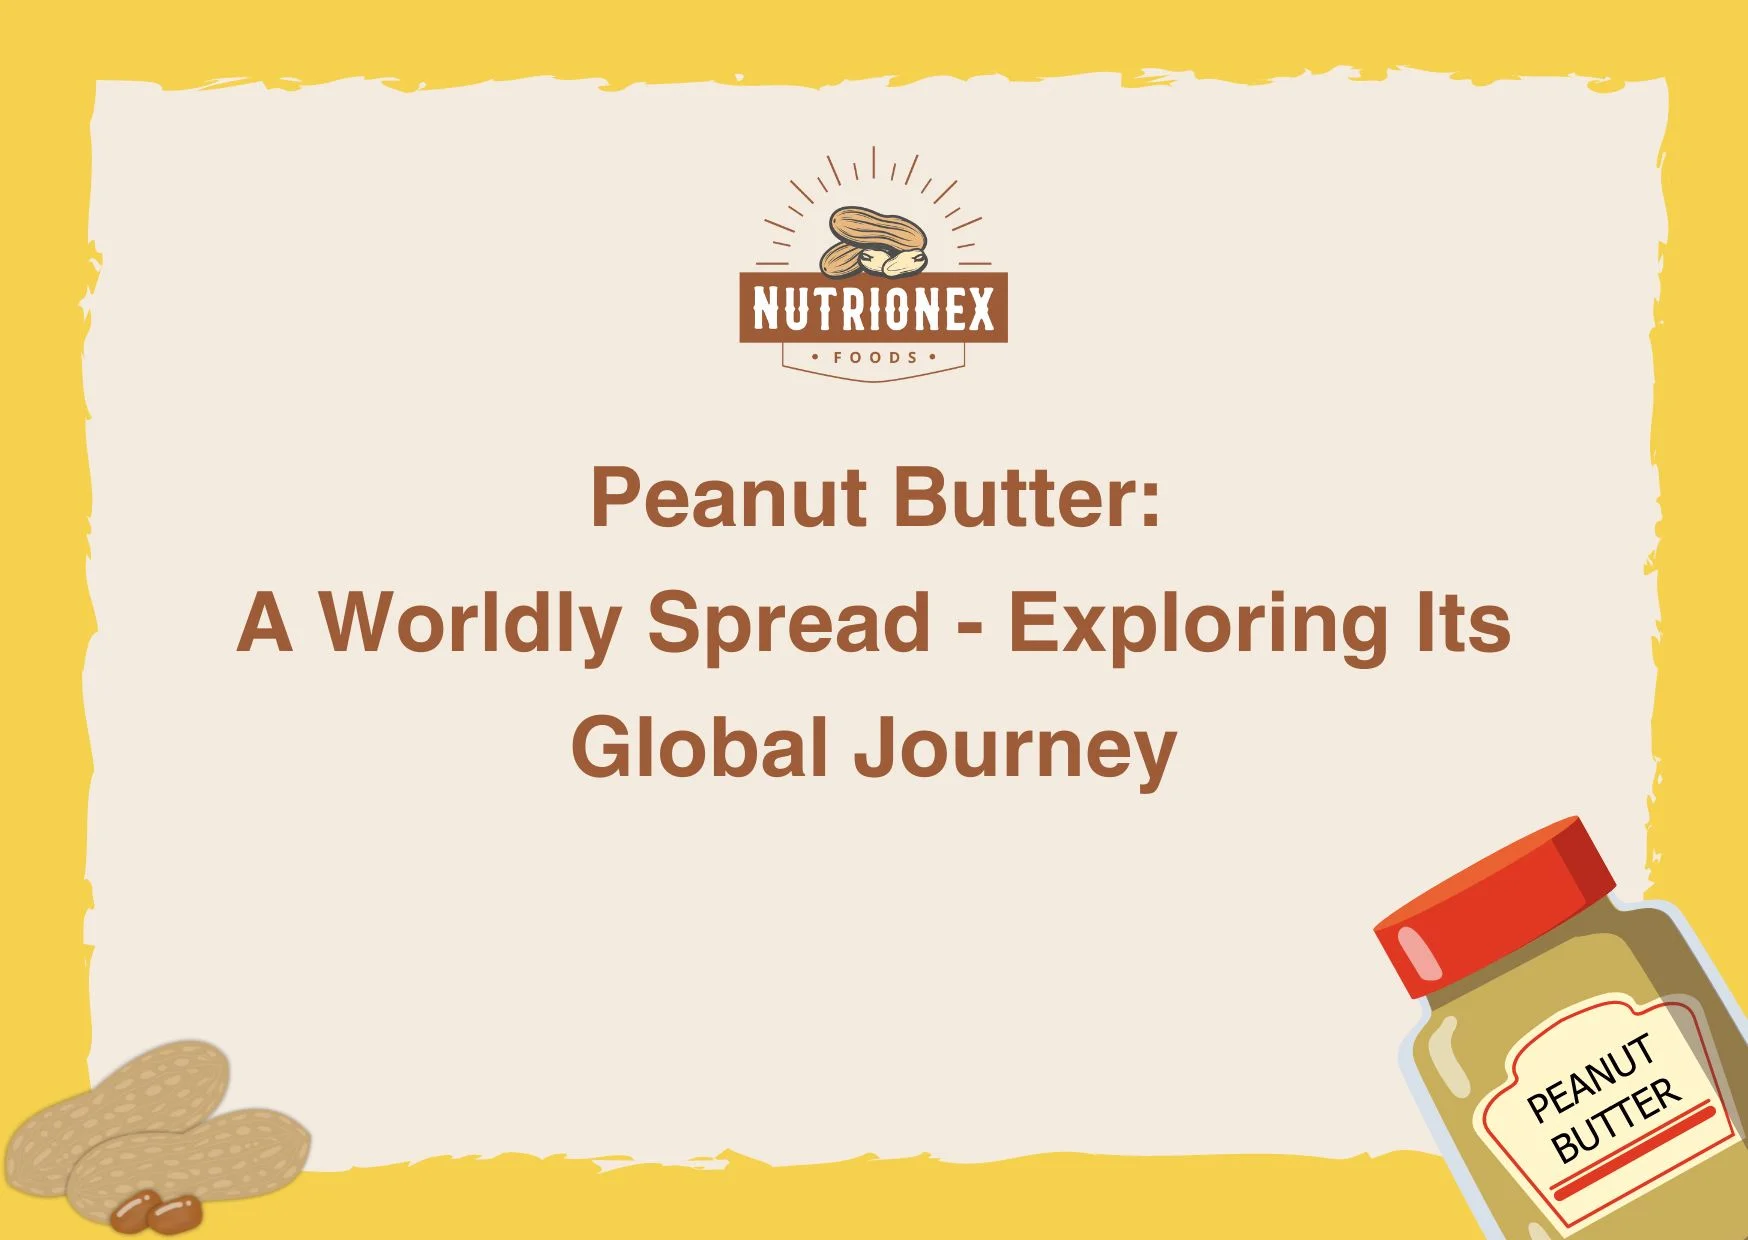 Peanut Butter: A Worldly Spread - Exploring Its Global Journey